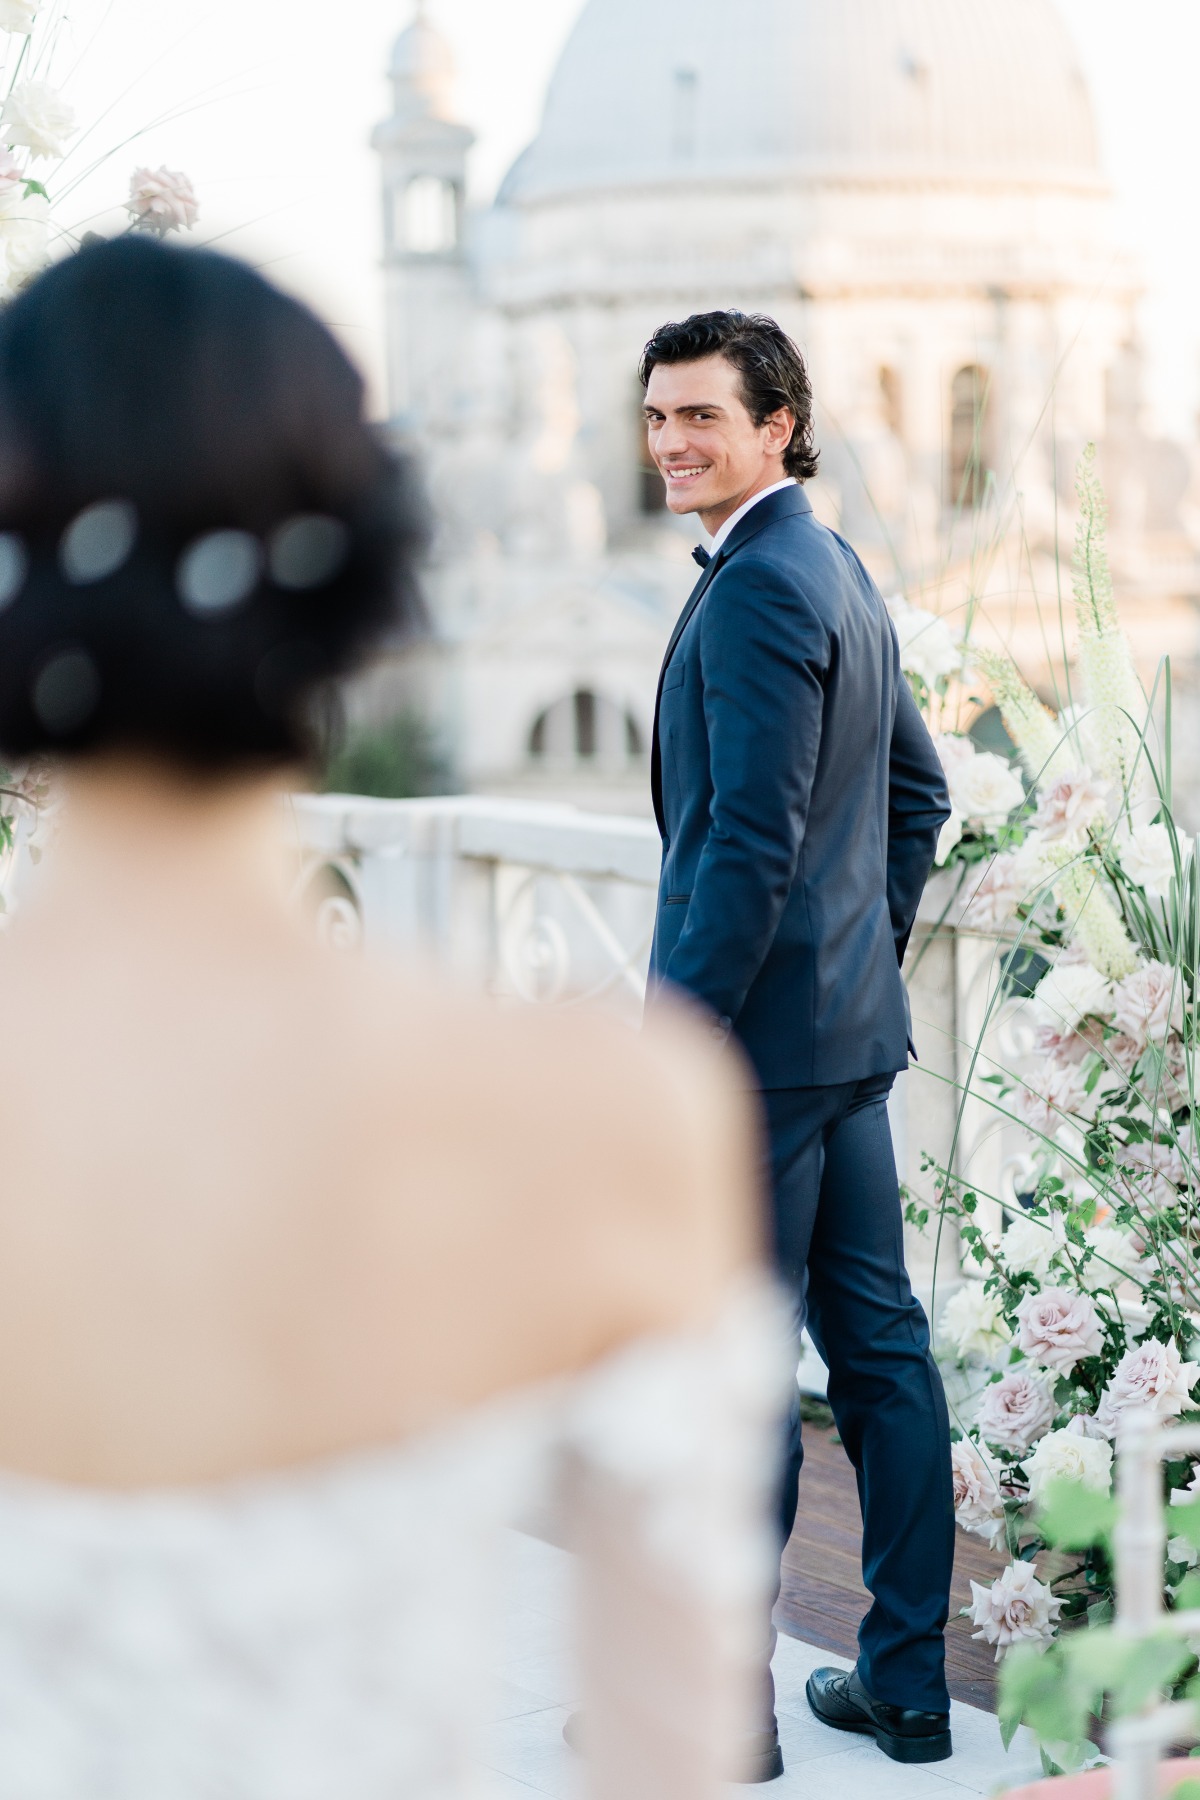 Intimate fairytale Wedding in the heart of Venice